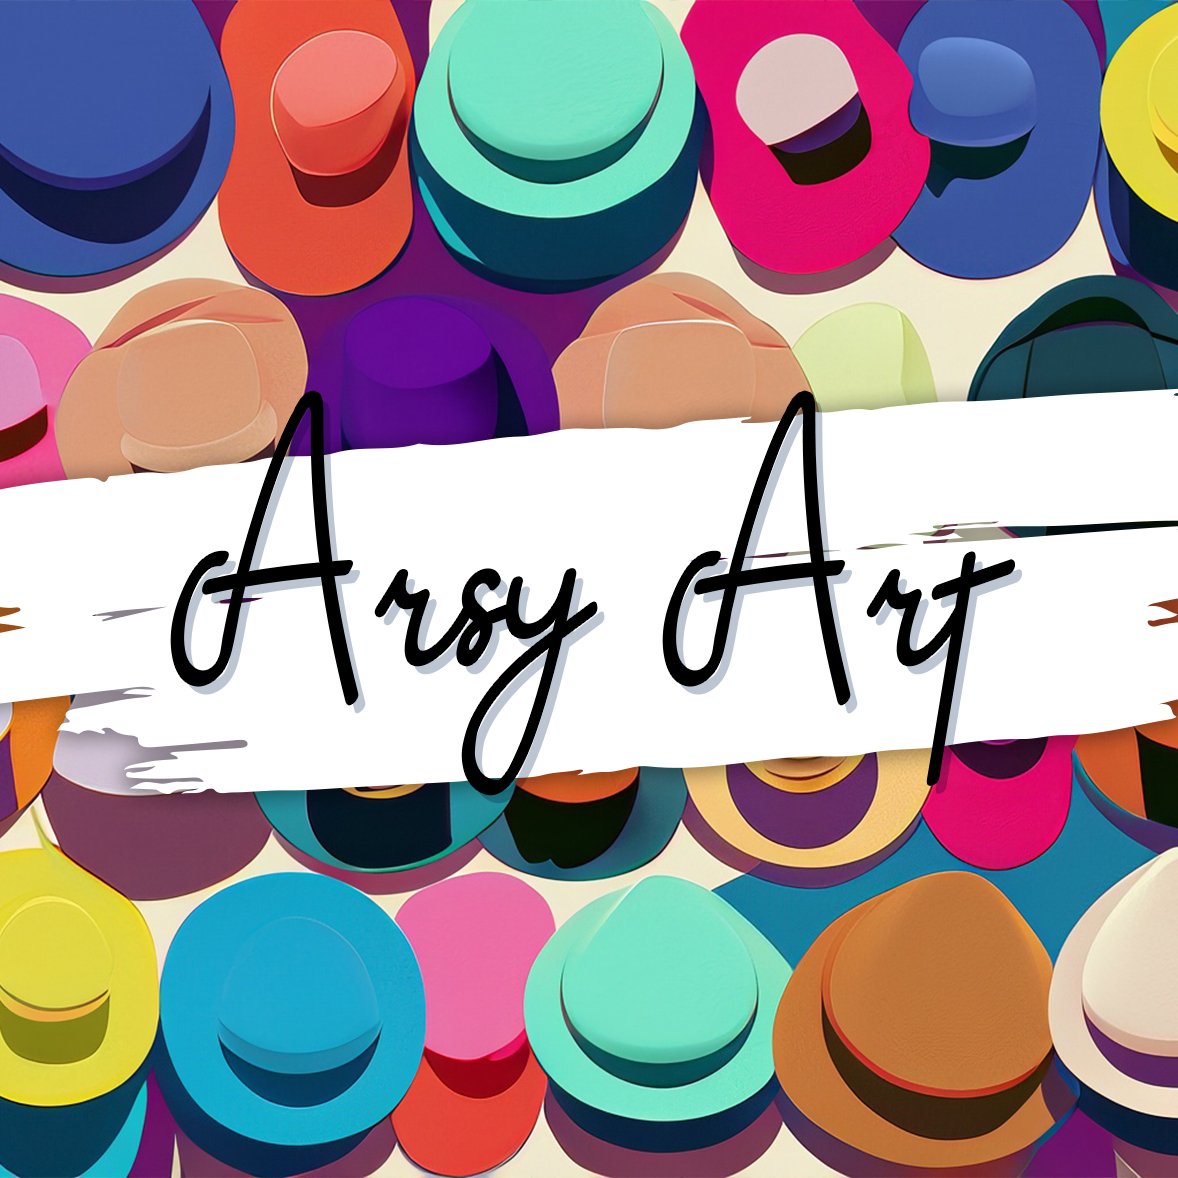 Save 15% Off Arsy Art Discount Code